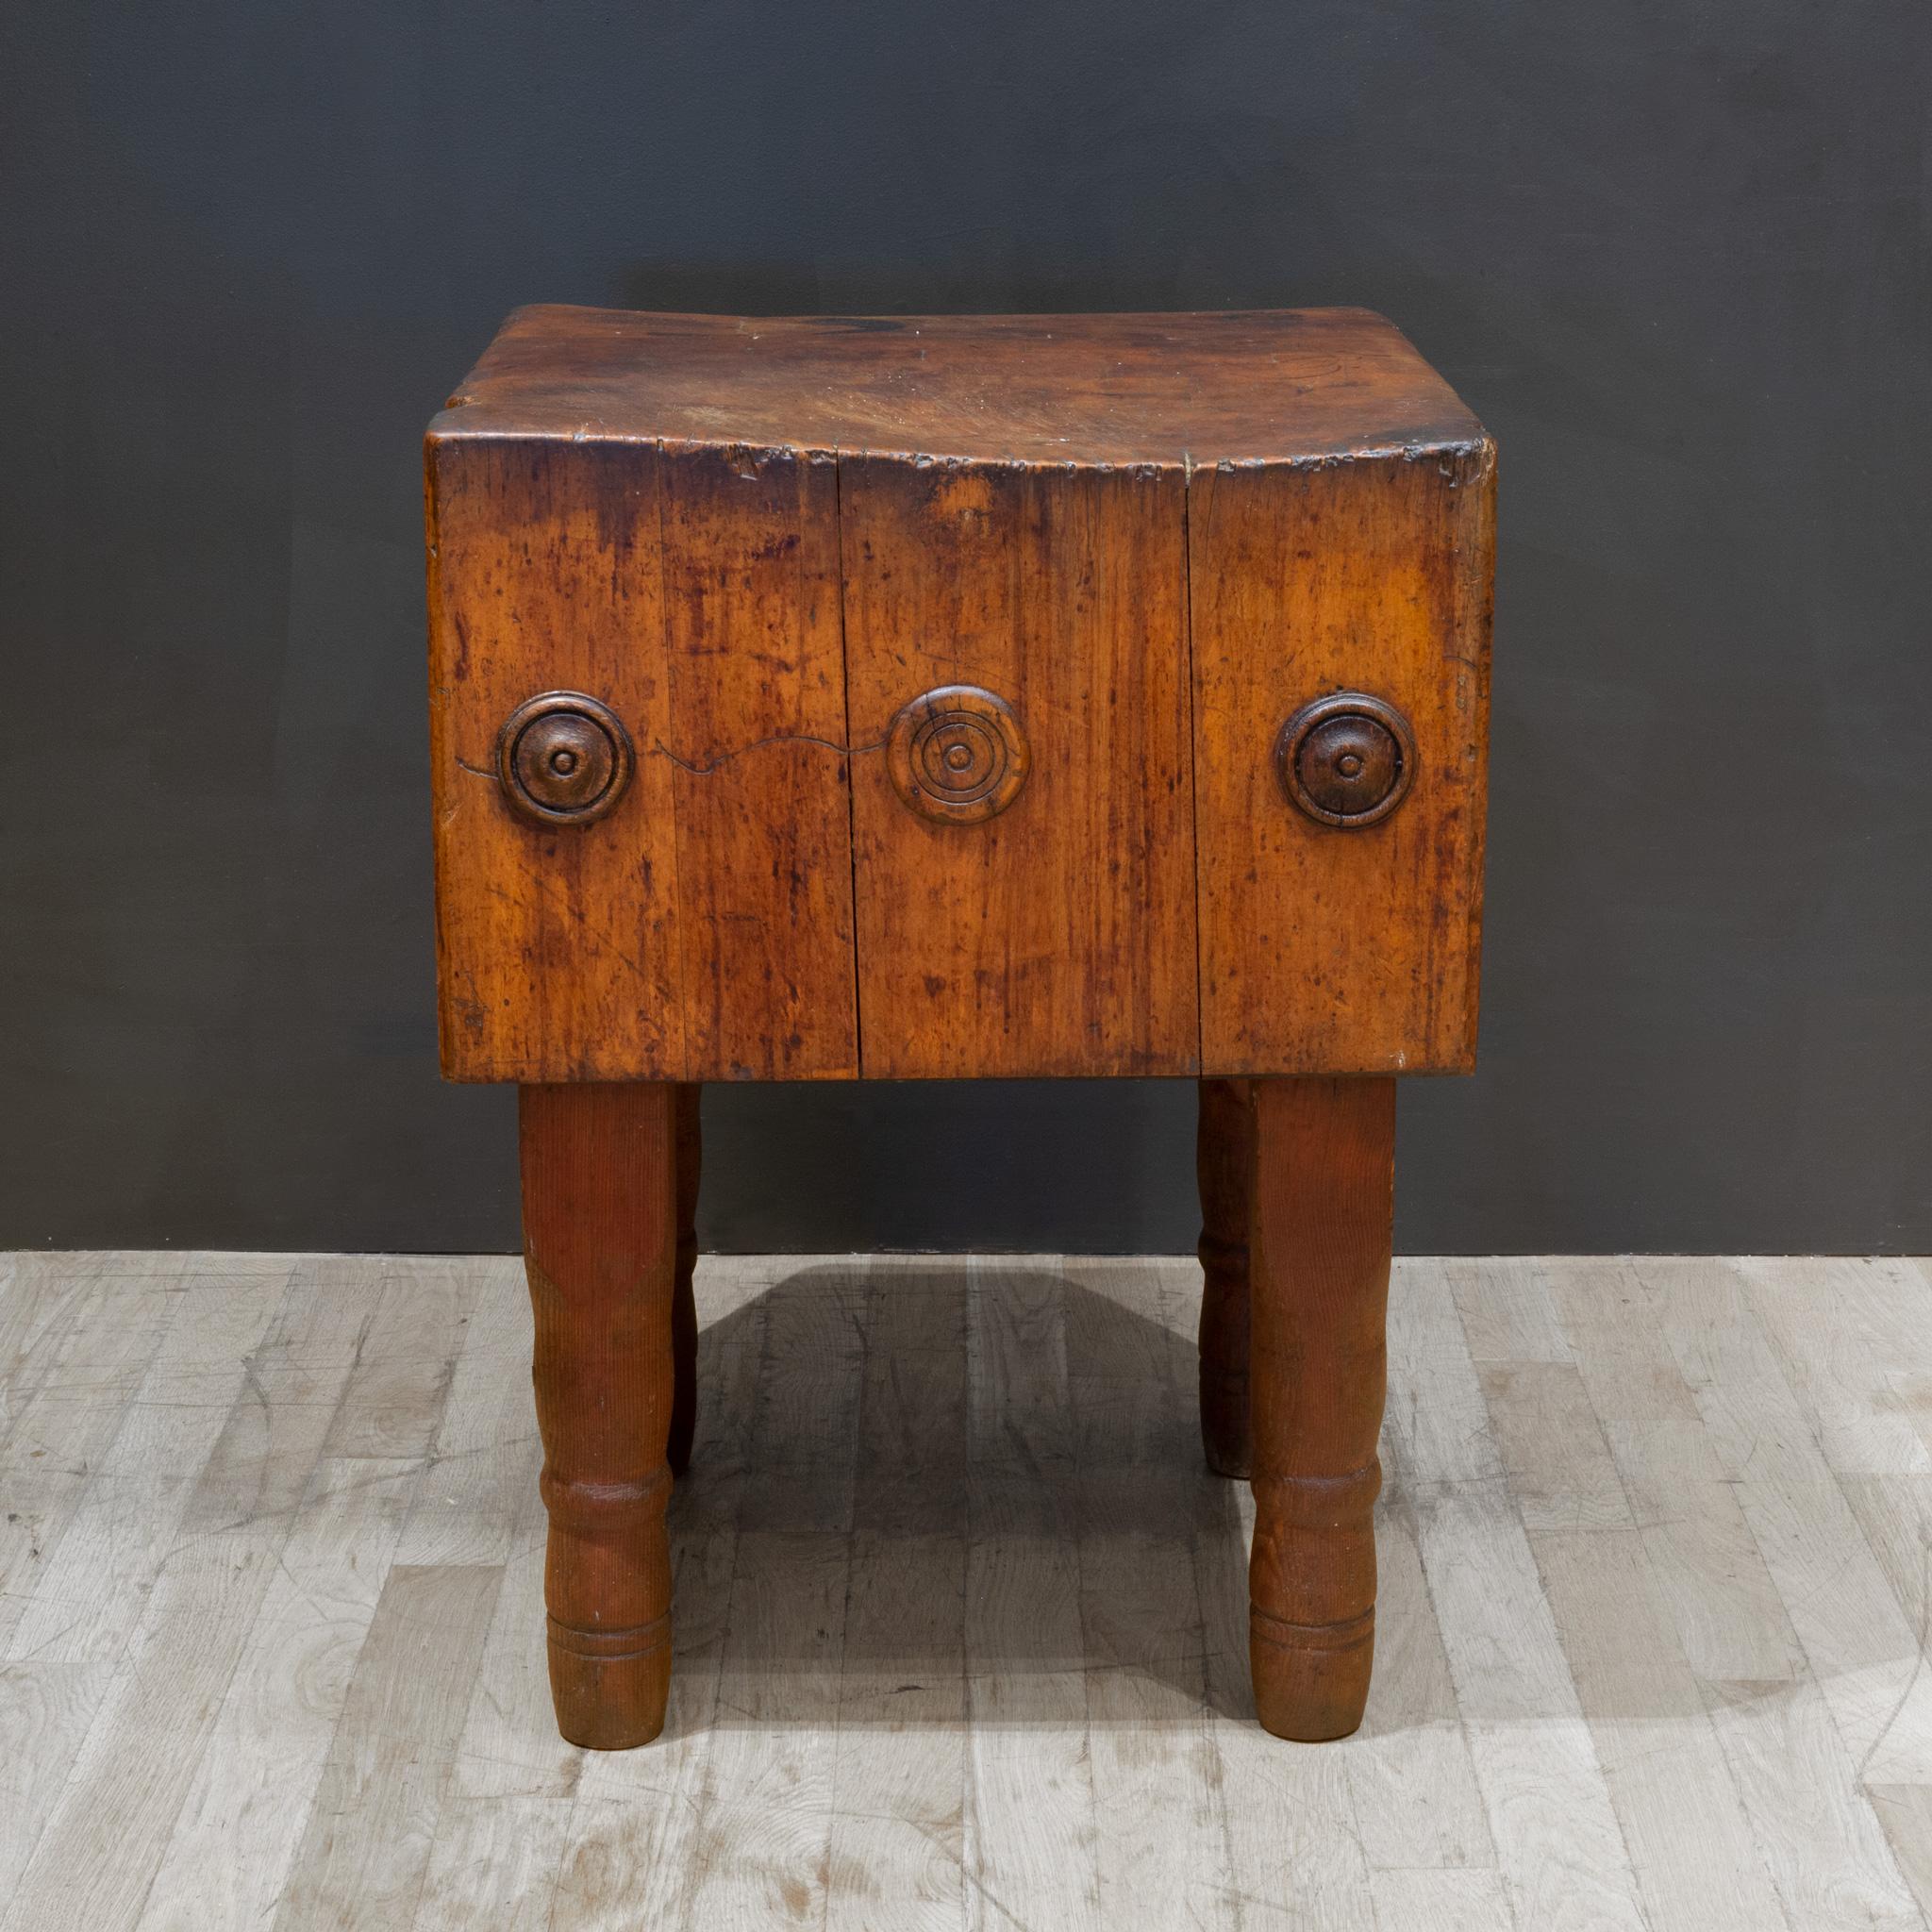 Wood Early 20th c. Maple Block Co. Butcher Block c.1930 For Sale